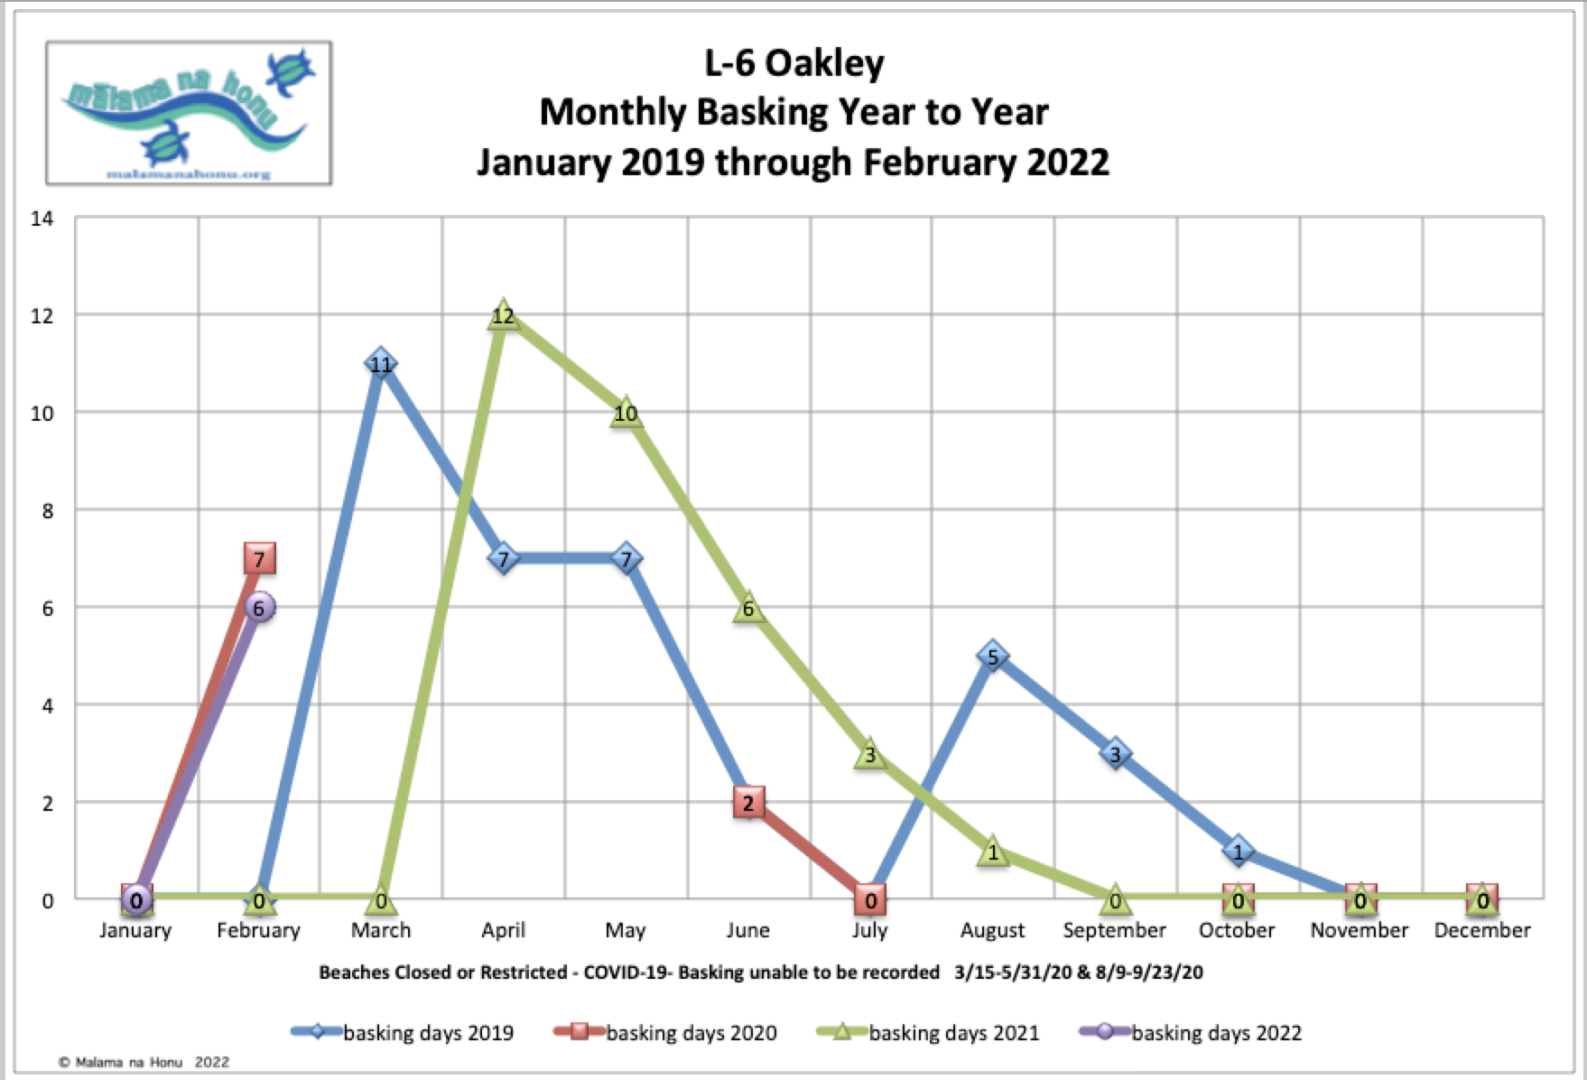 L-6 Oakley Monthly Basking Year to Year January 2019 through February 2022